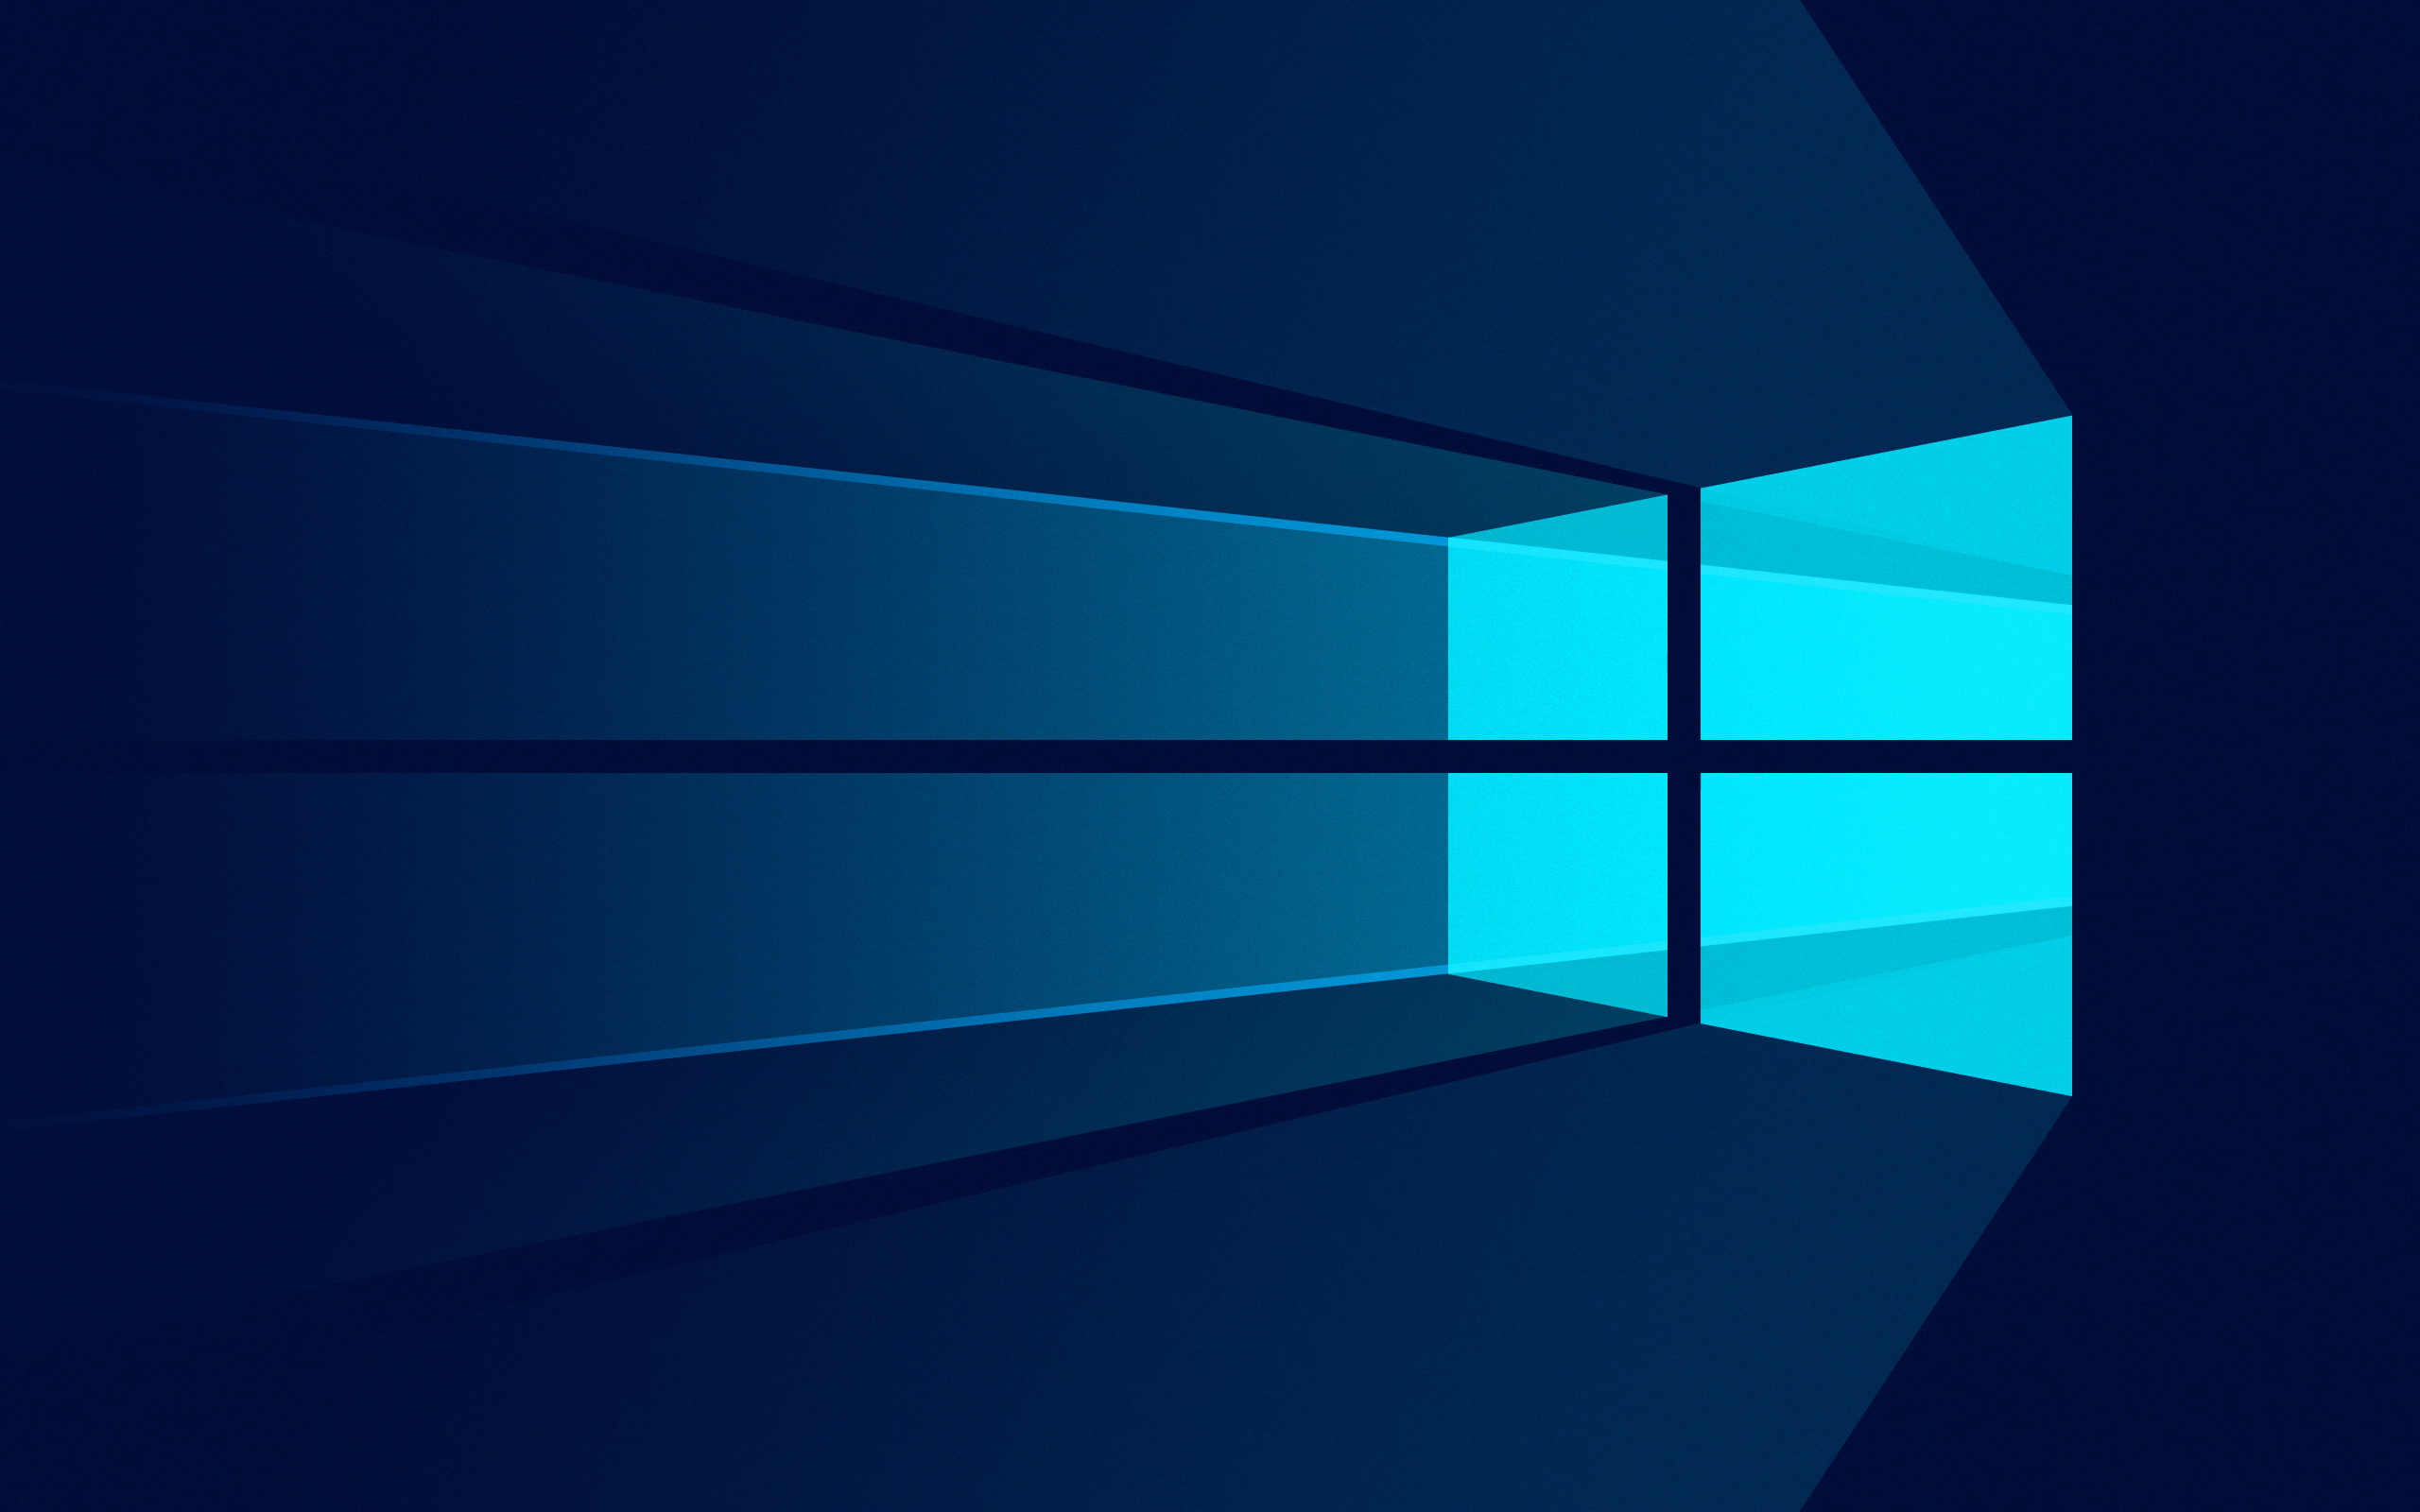 2023 Windows Update: What's Going Away? Your Guide to the Latest Changes